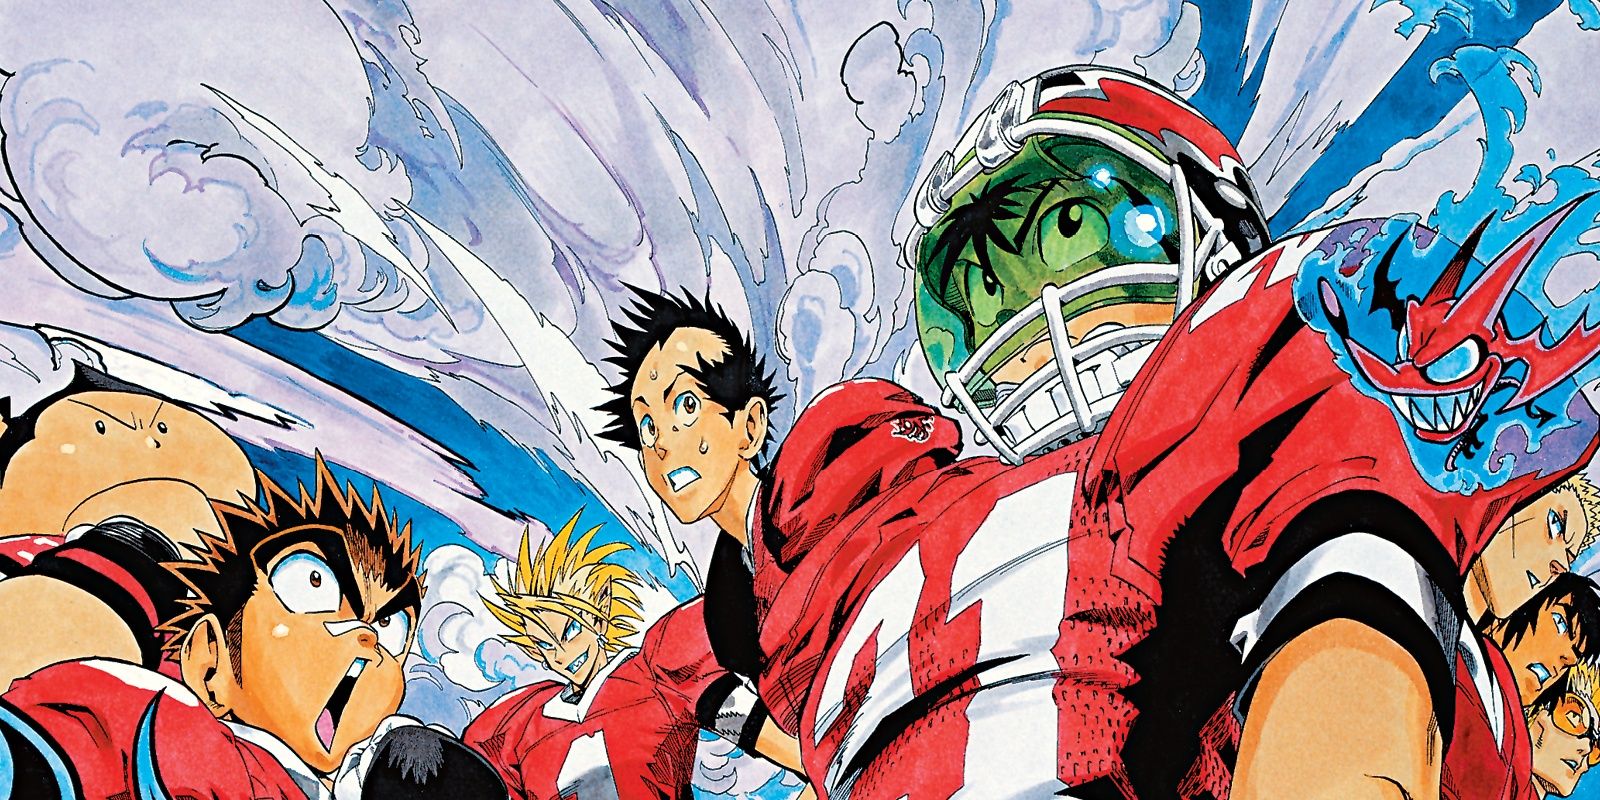 Anime Eyeshield 21 HD Wallpapers and Backgrounds